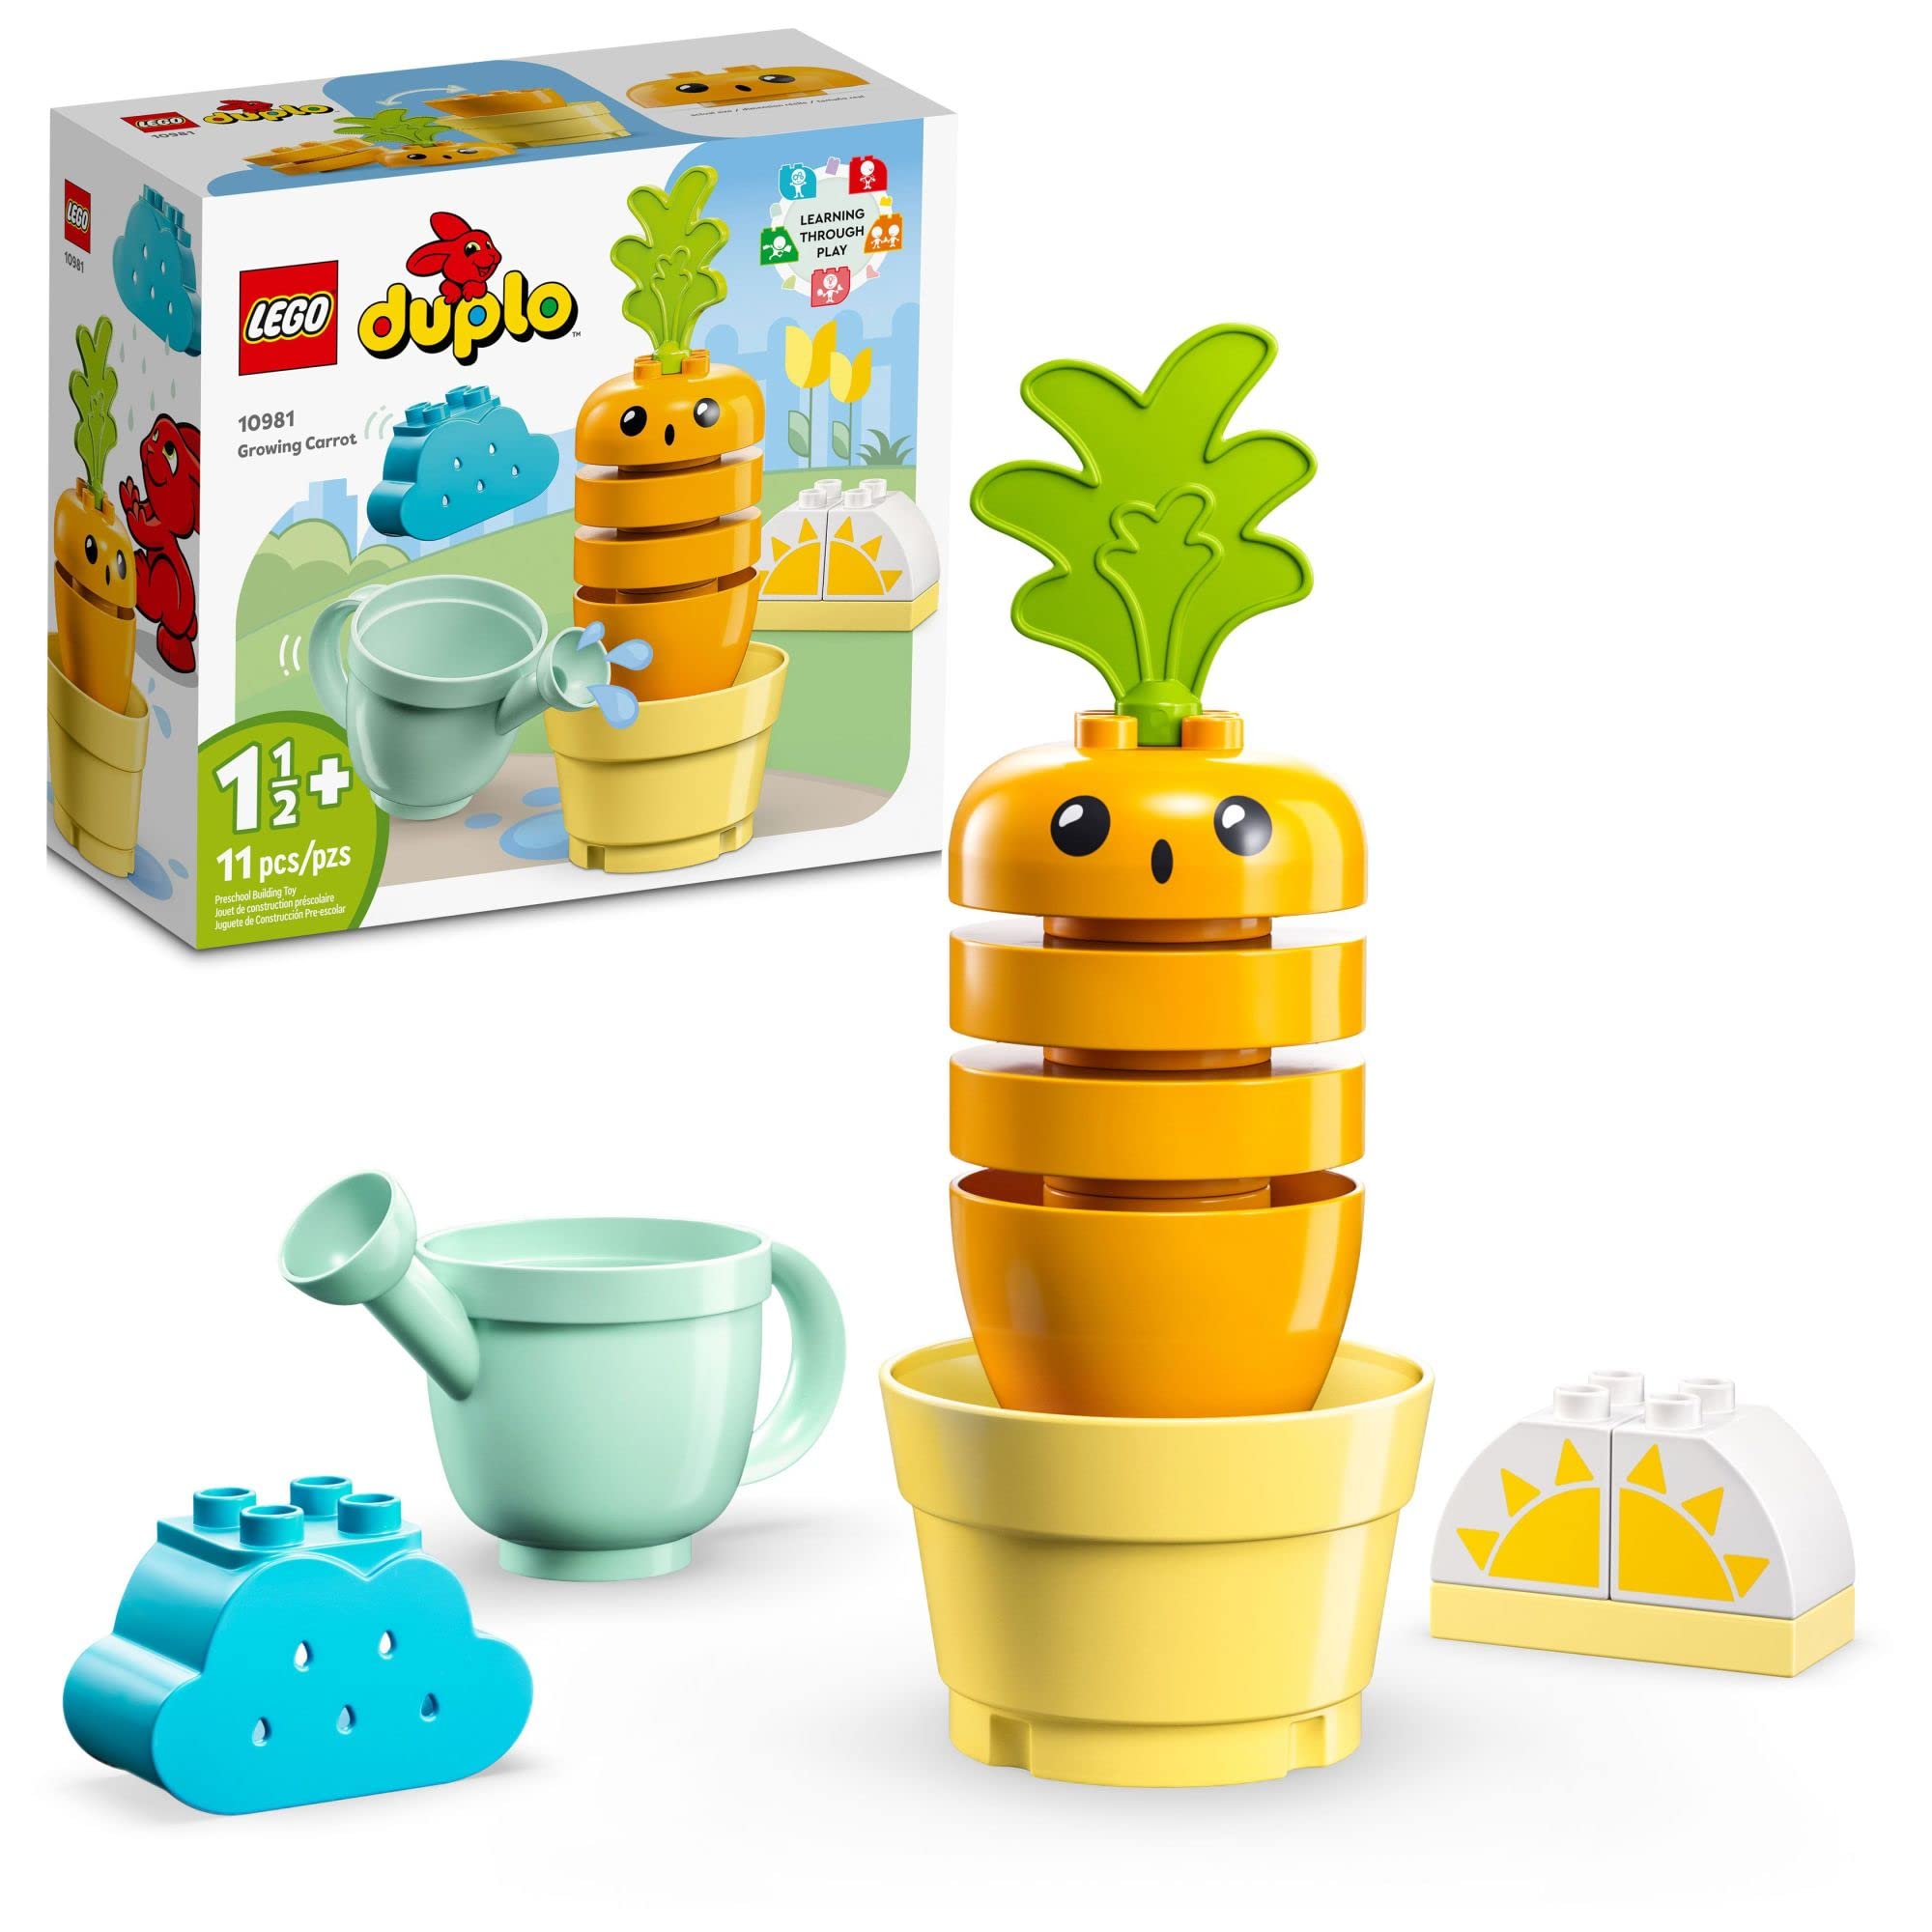 LEGO DUPLO My First Growing Carrot (10981) $6.99